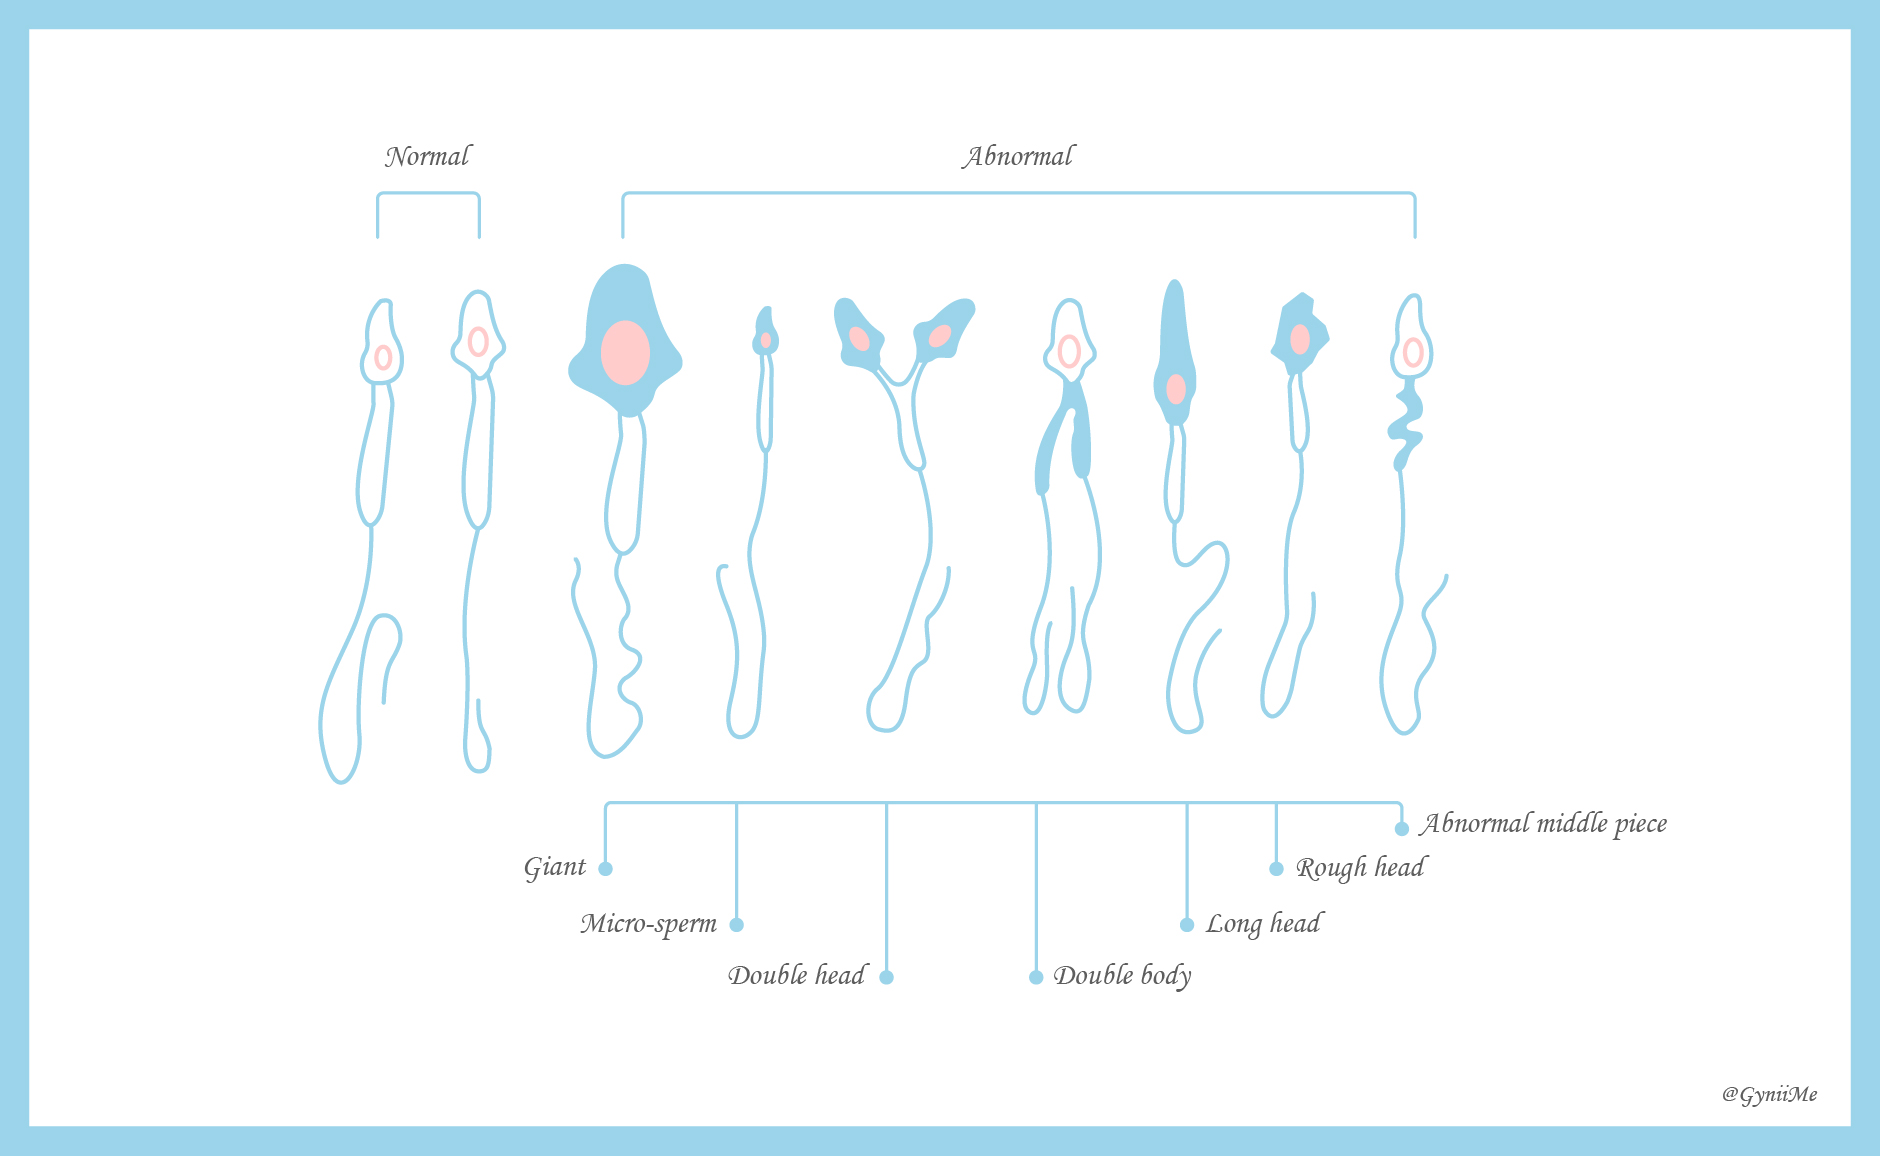 Diagram comparing normal and abnormal sperm morphology